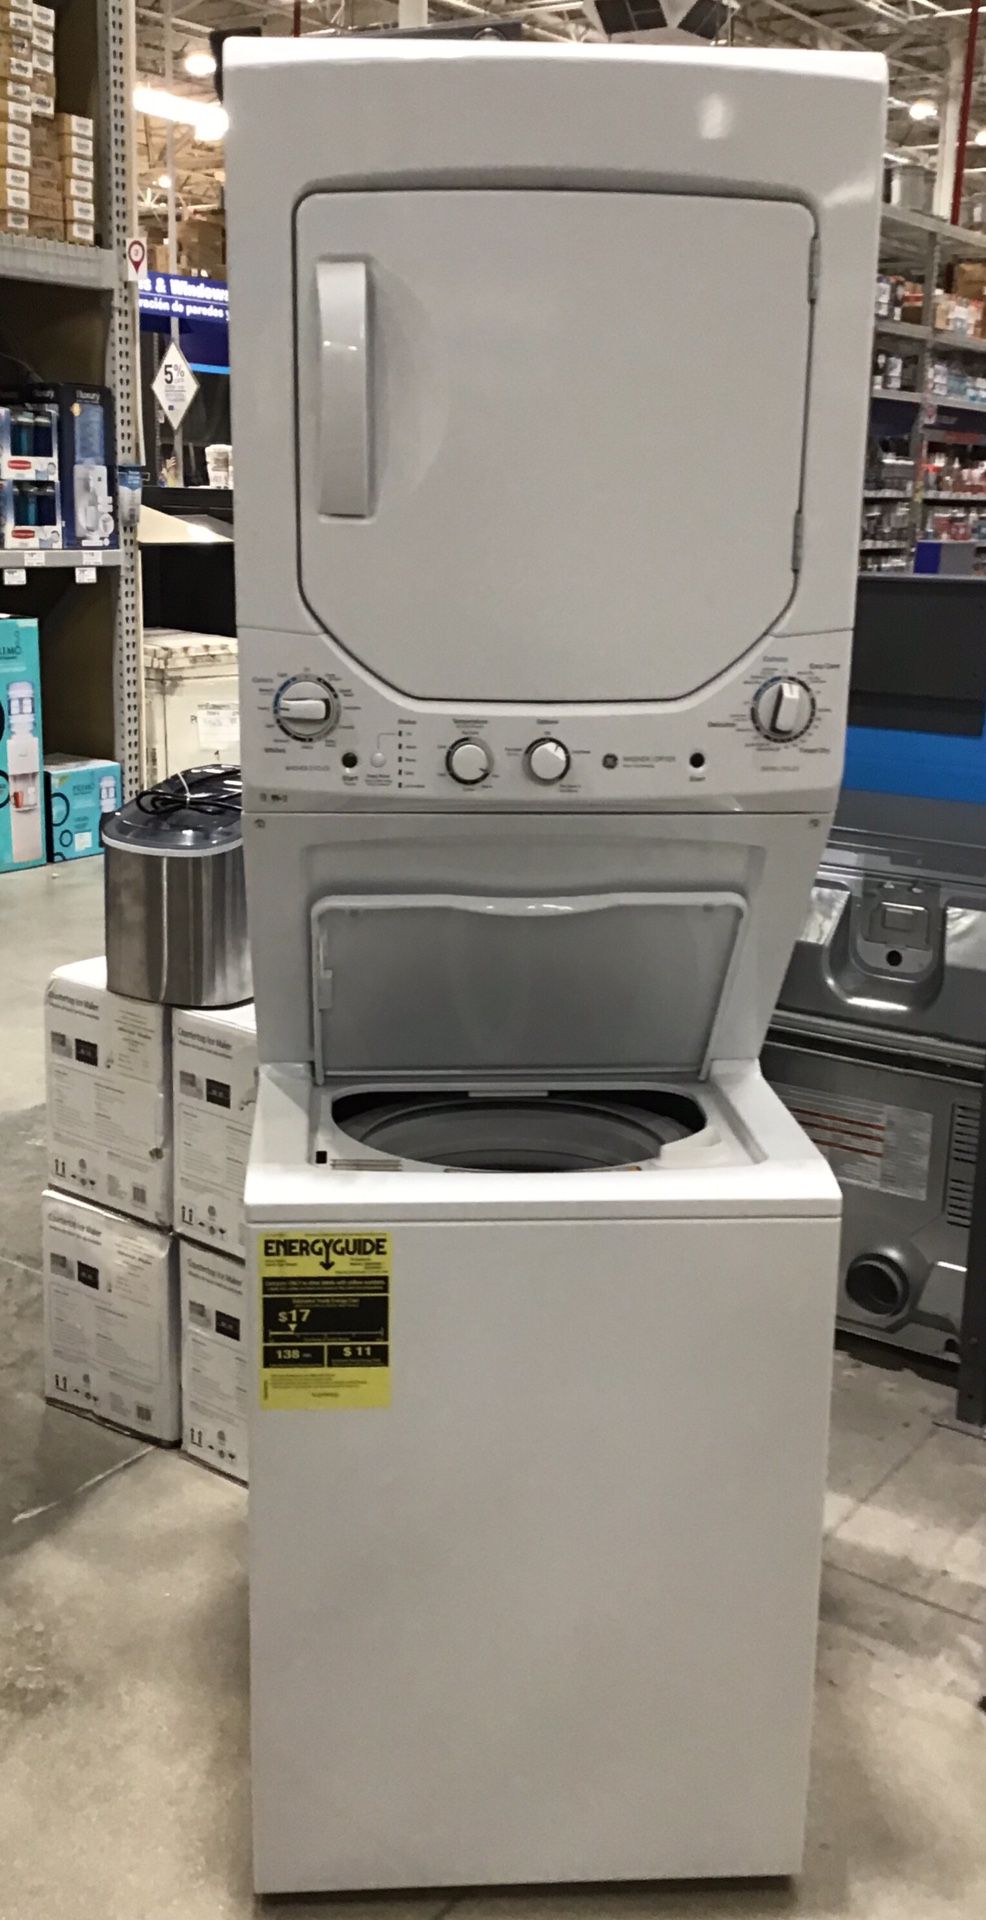 GE stacked Washer/Dryer